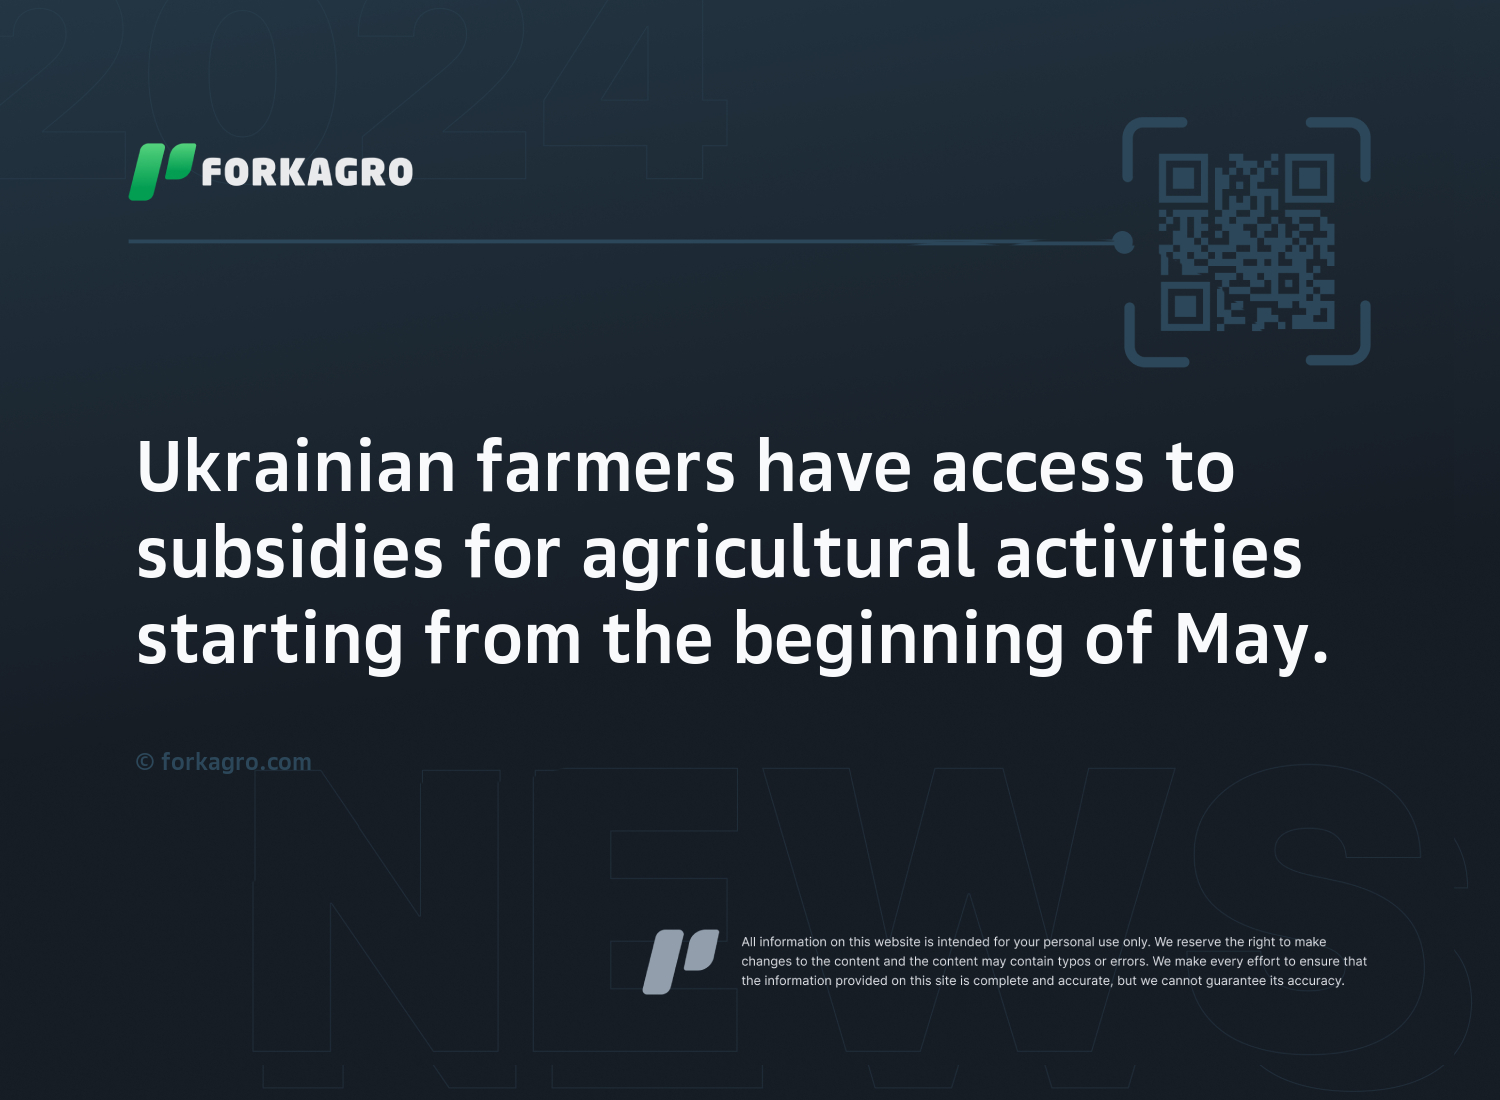 Ukrainian farmers have access to subsidies for agricultural activities starting from the beginning of May.